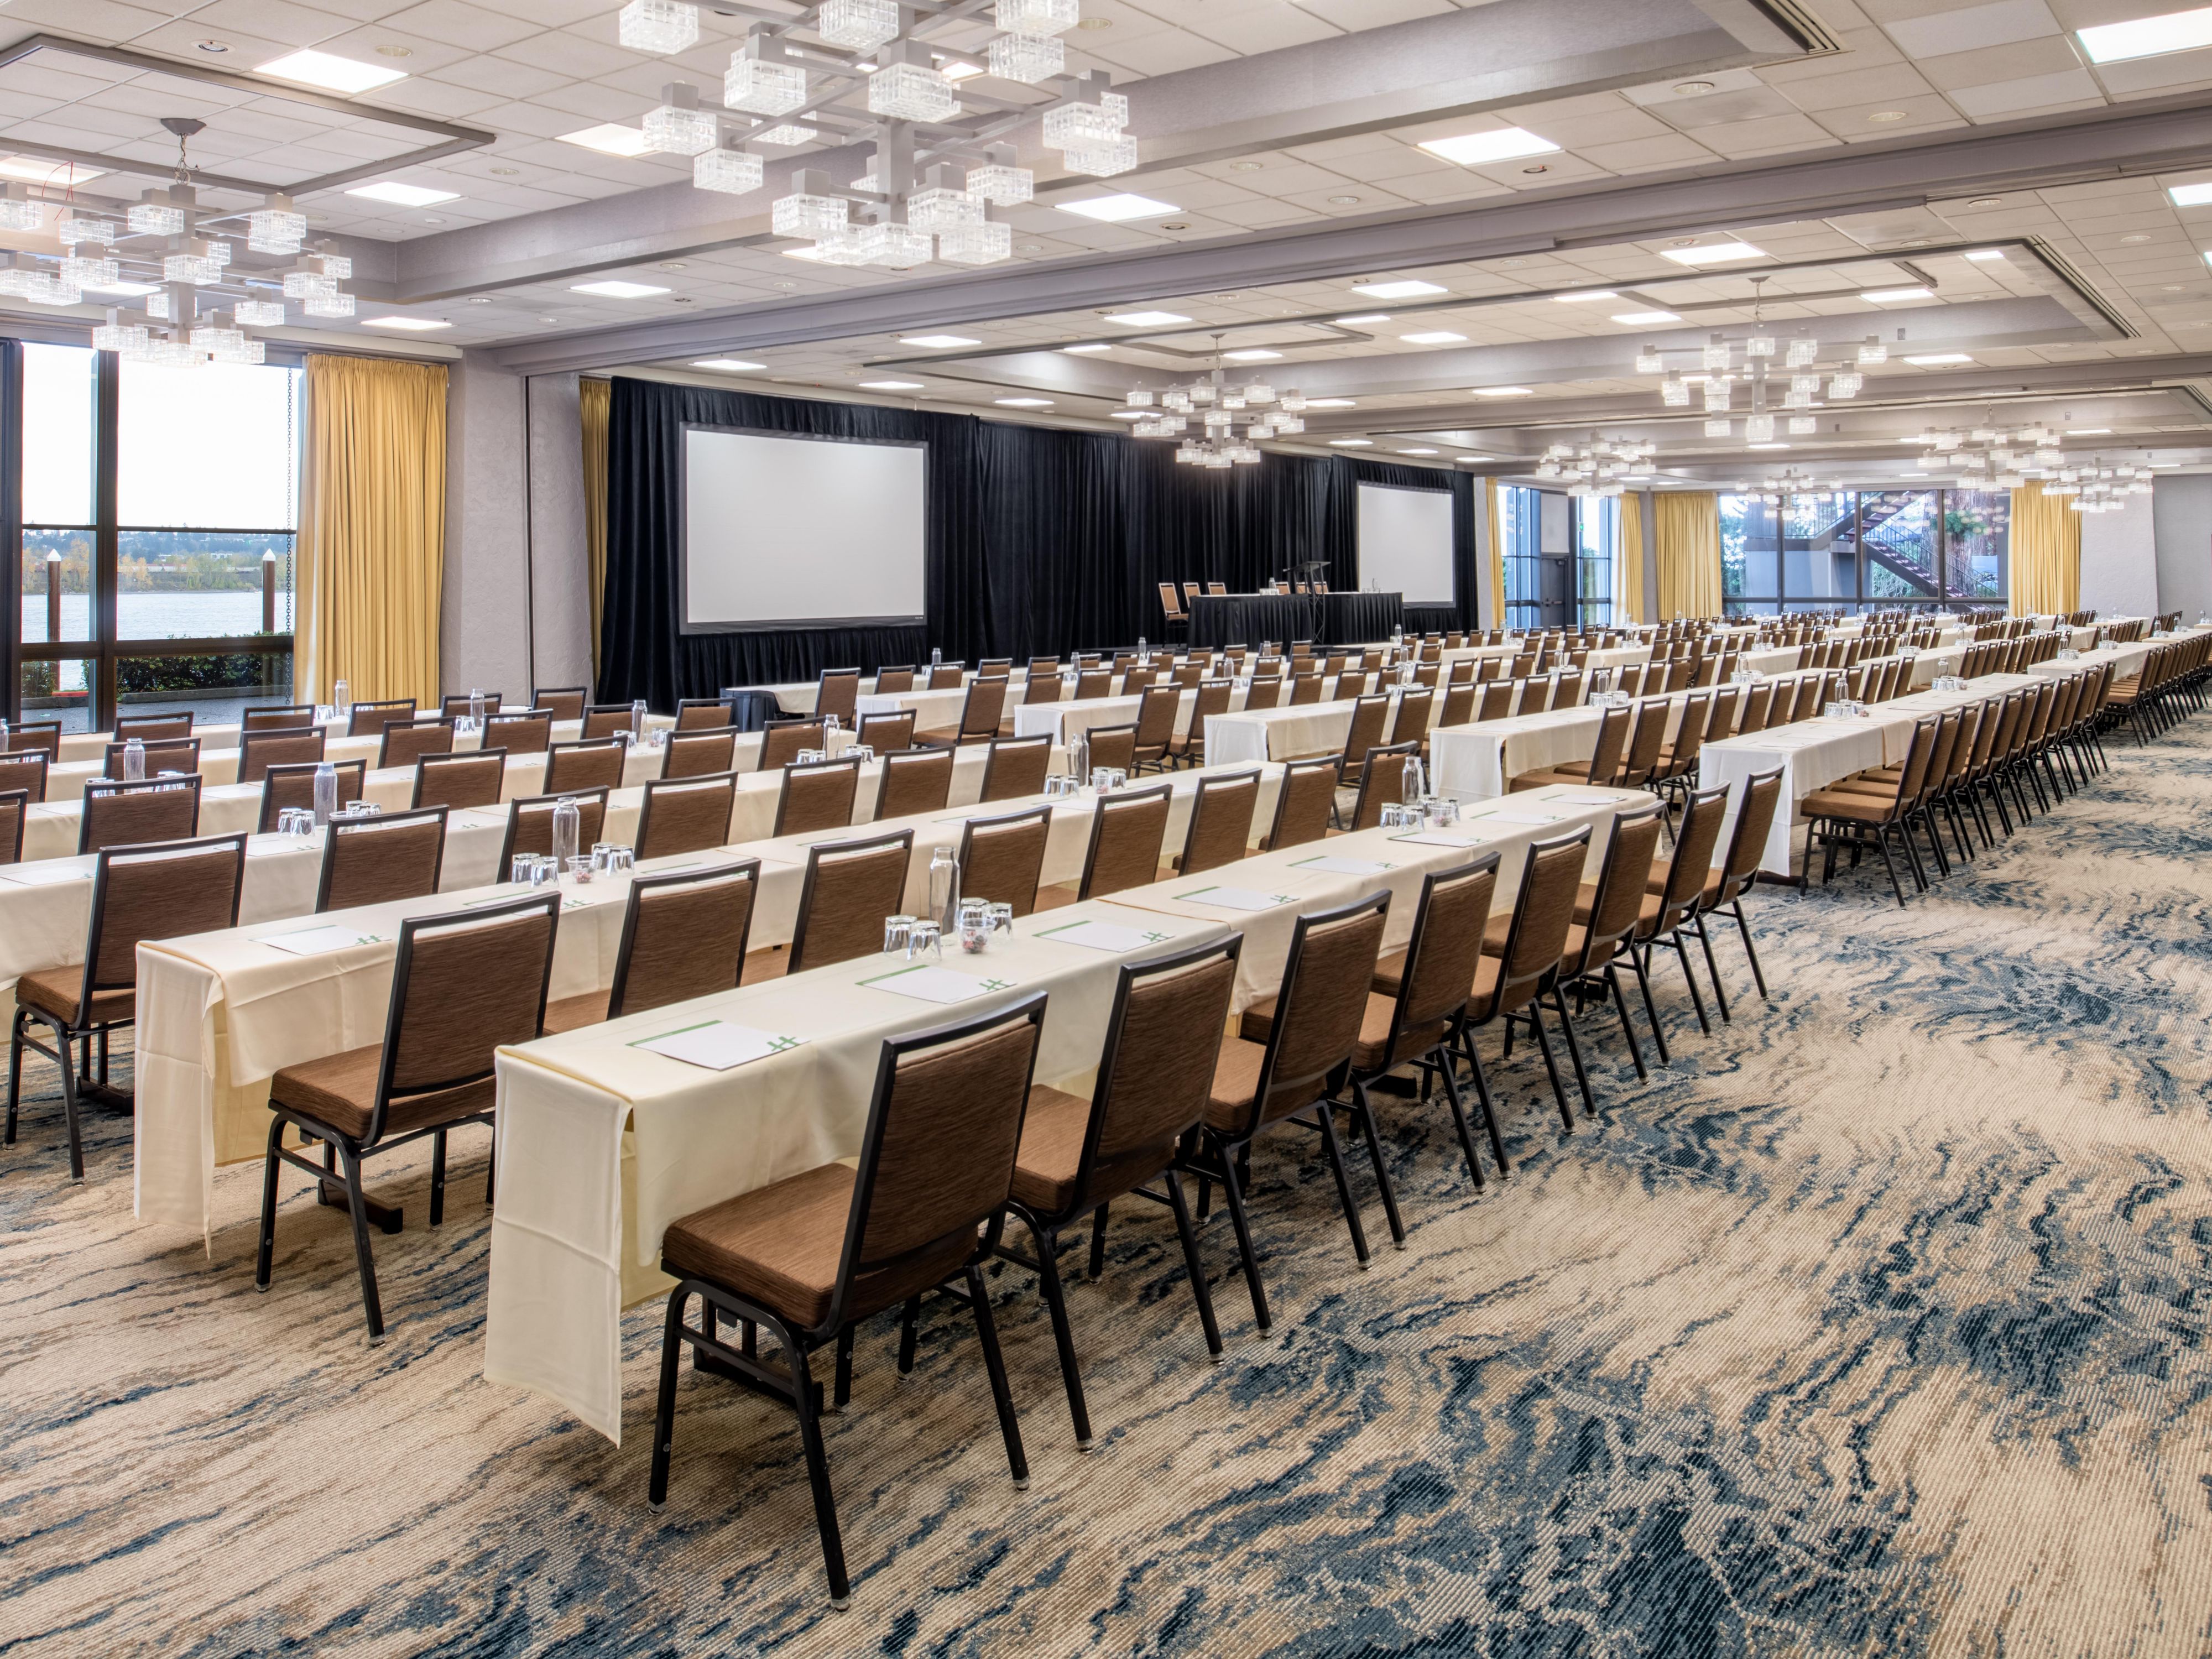 Host your meetings, conferences, weddings, and social gatherings in 41,000 square feet of flexible space with 19 rooms. Our hotel features the 18,000-square-foot Grand Ballroom and the Mt. St. Helens Ballroom with floor-to-ceiling scenic views of the Columbia River. Let our team help plan your Portland events, from catering to audiovisual support.